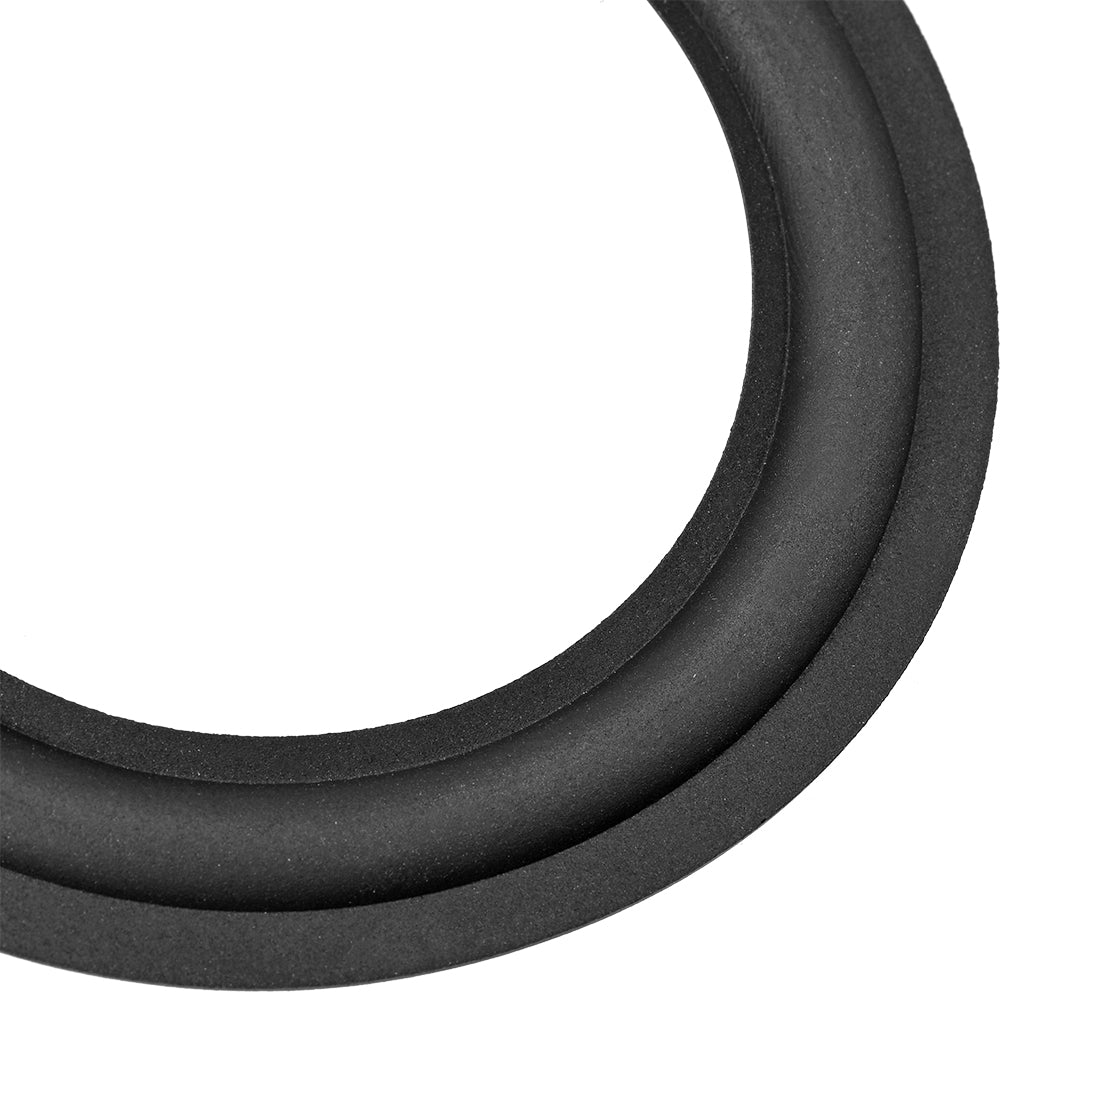 uxcell Uxcell 4.5" 4.5 Inch Rubber Edge Surround Rings Replacement Part for Repair or DIY 4pcs